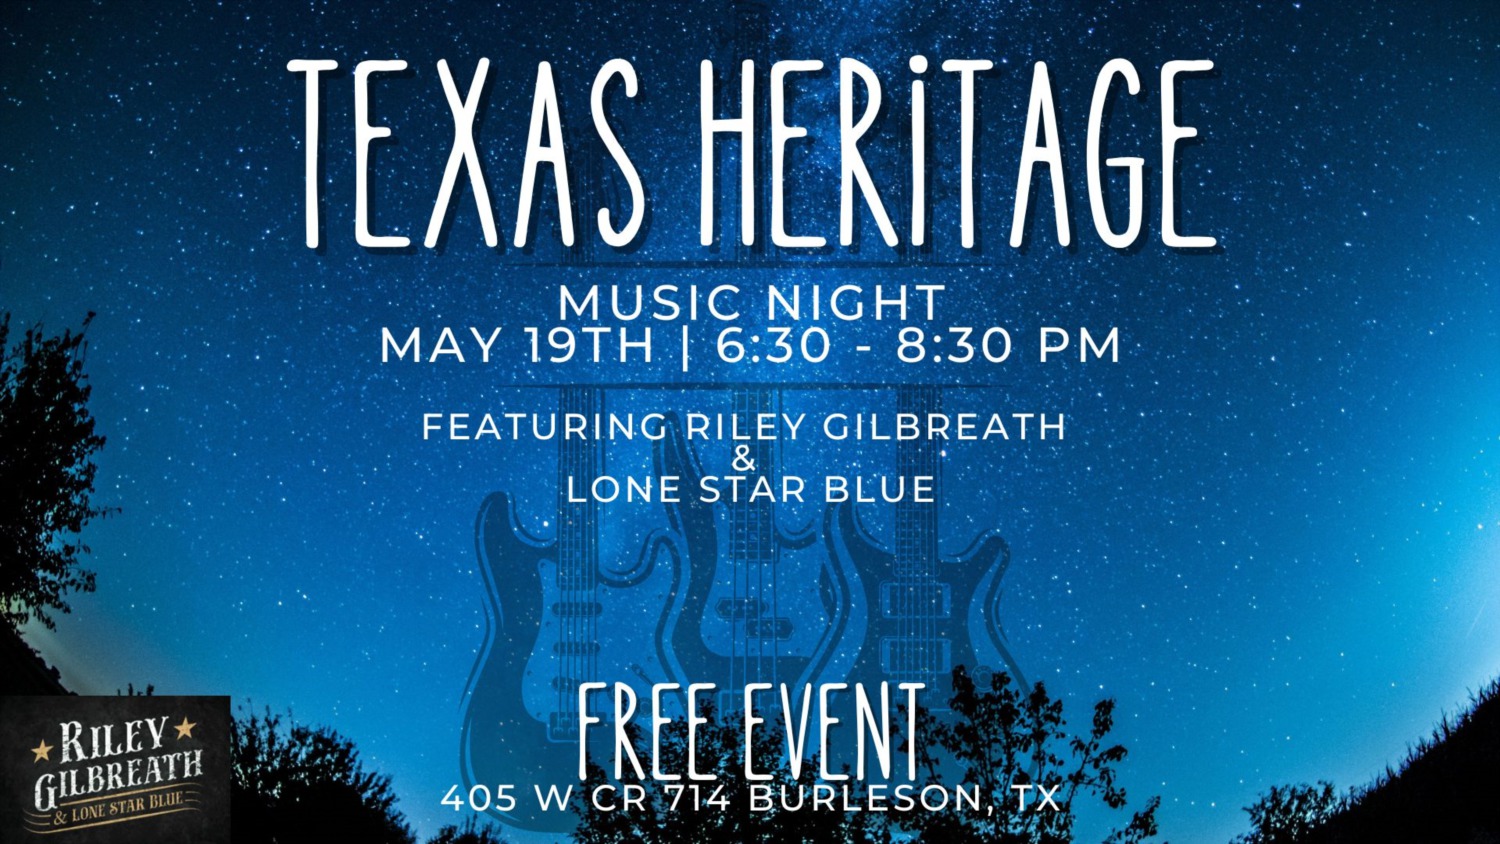 TX Heritage Festival Burleson Texas May 19 630 830 PM